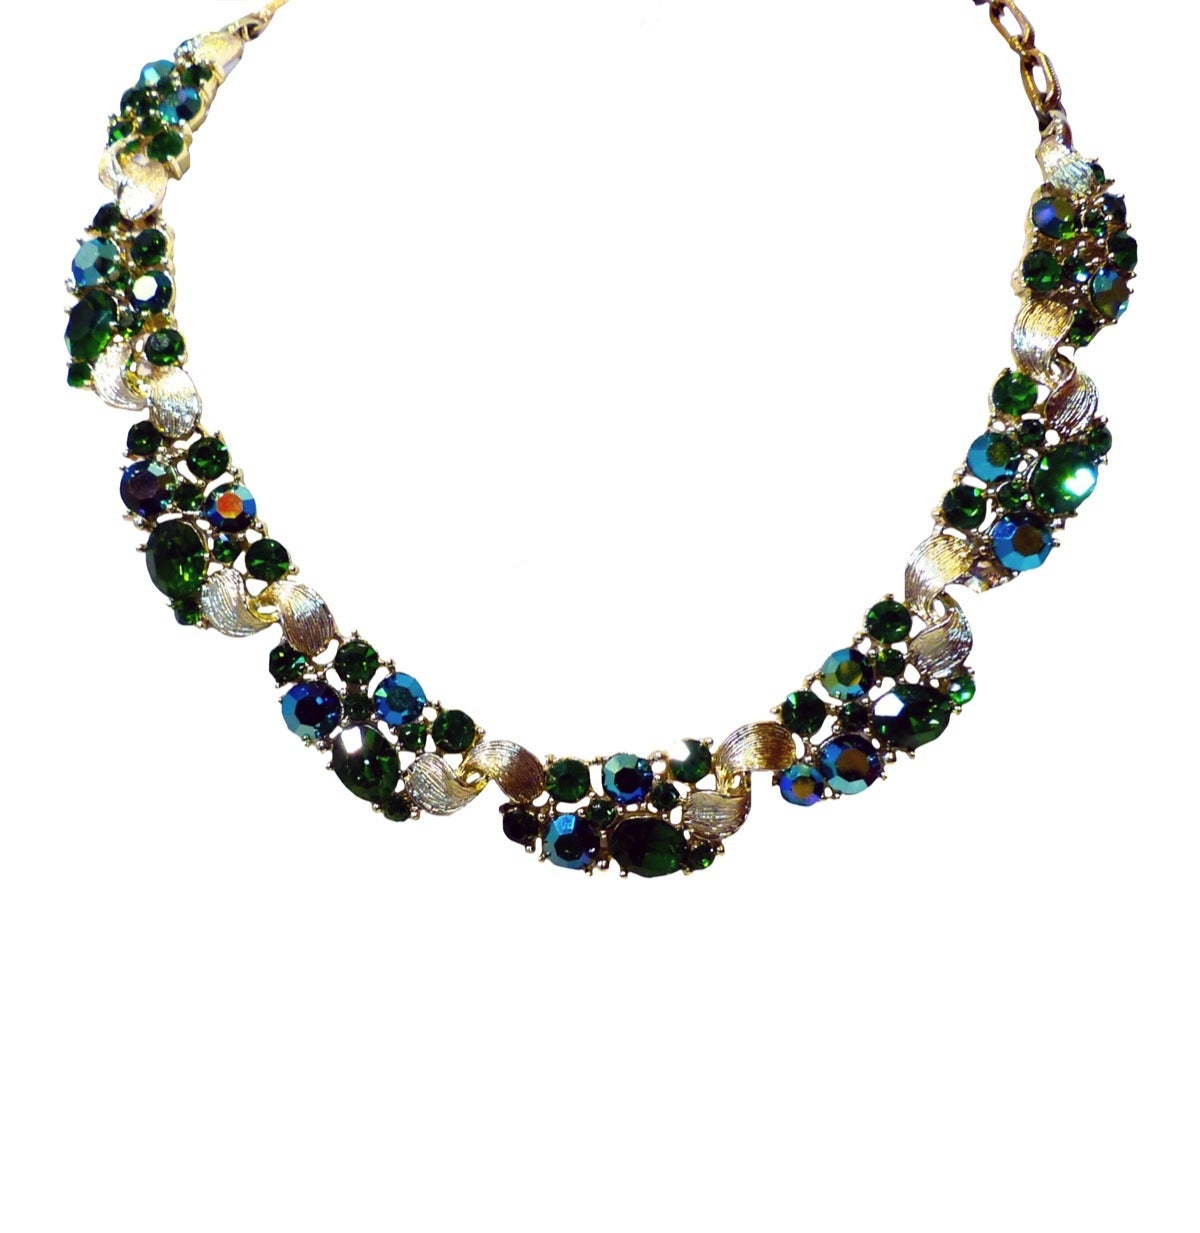 This Lisner set features faceted green & aurora borealis rhinestones in a gold-tone setting. The necklace measures 16 ½” long x 5/8” with a hook closure; the screw-on earrings are 7/8” x 5/8” and the bracelet is 6 ¾” x ½” with a pressure closure and